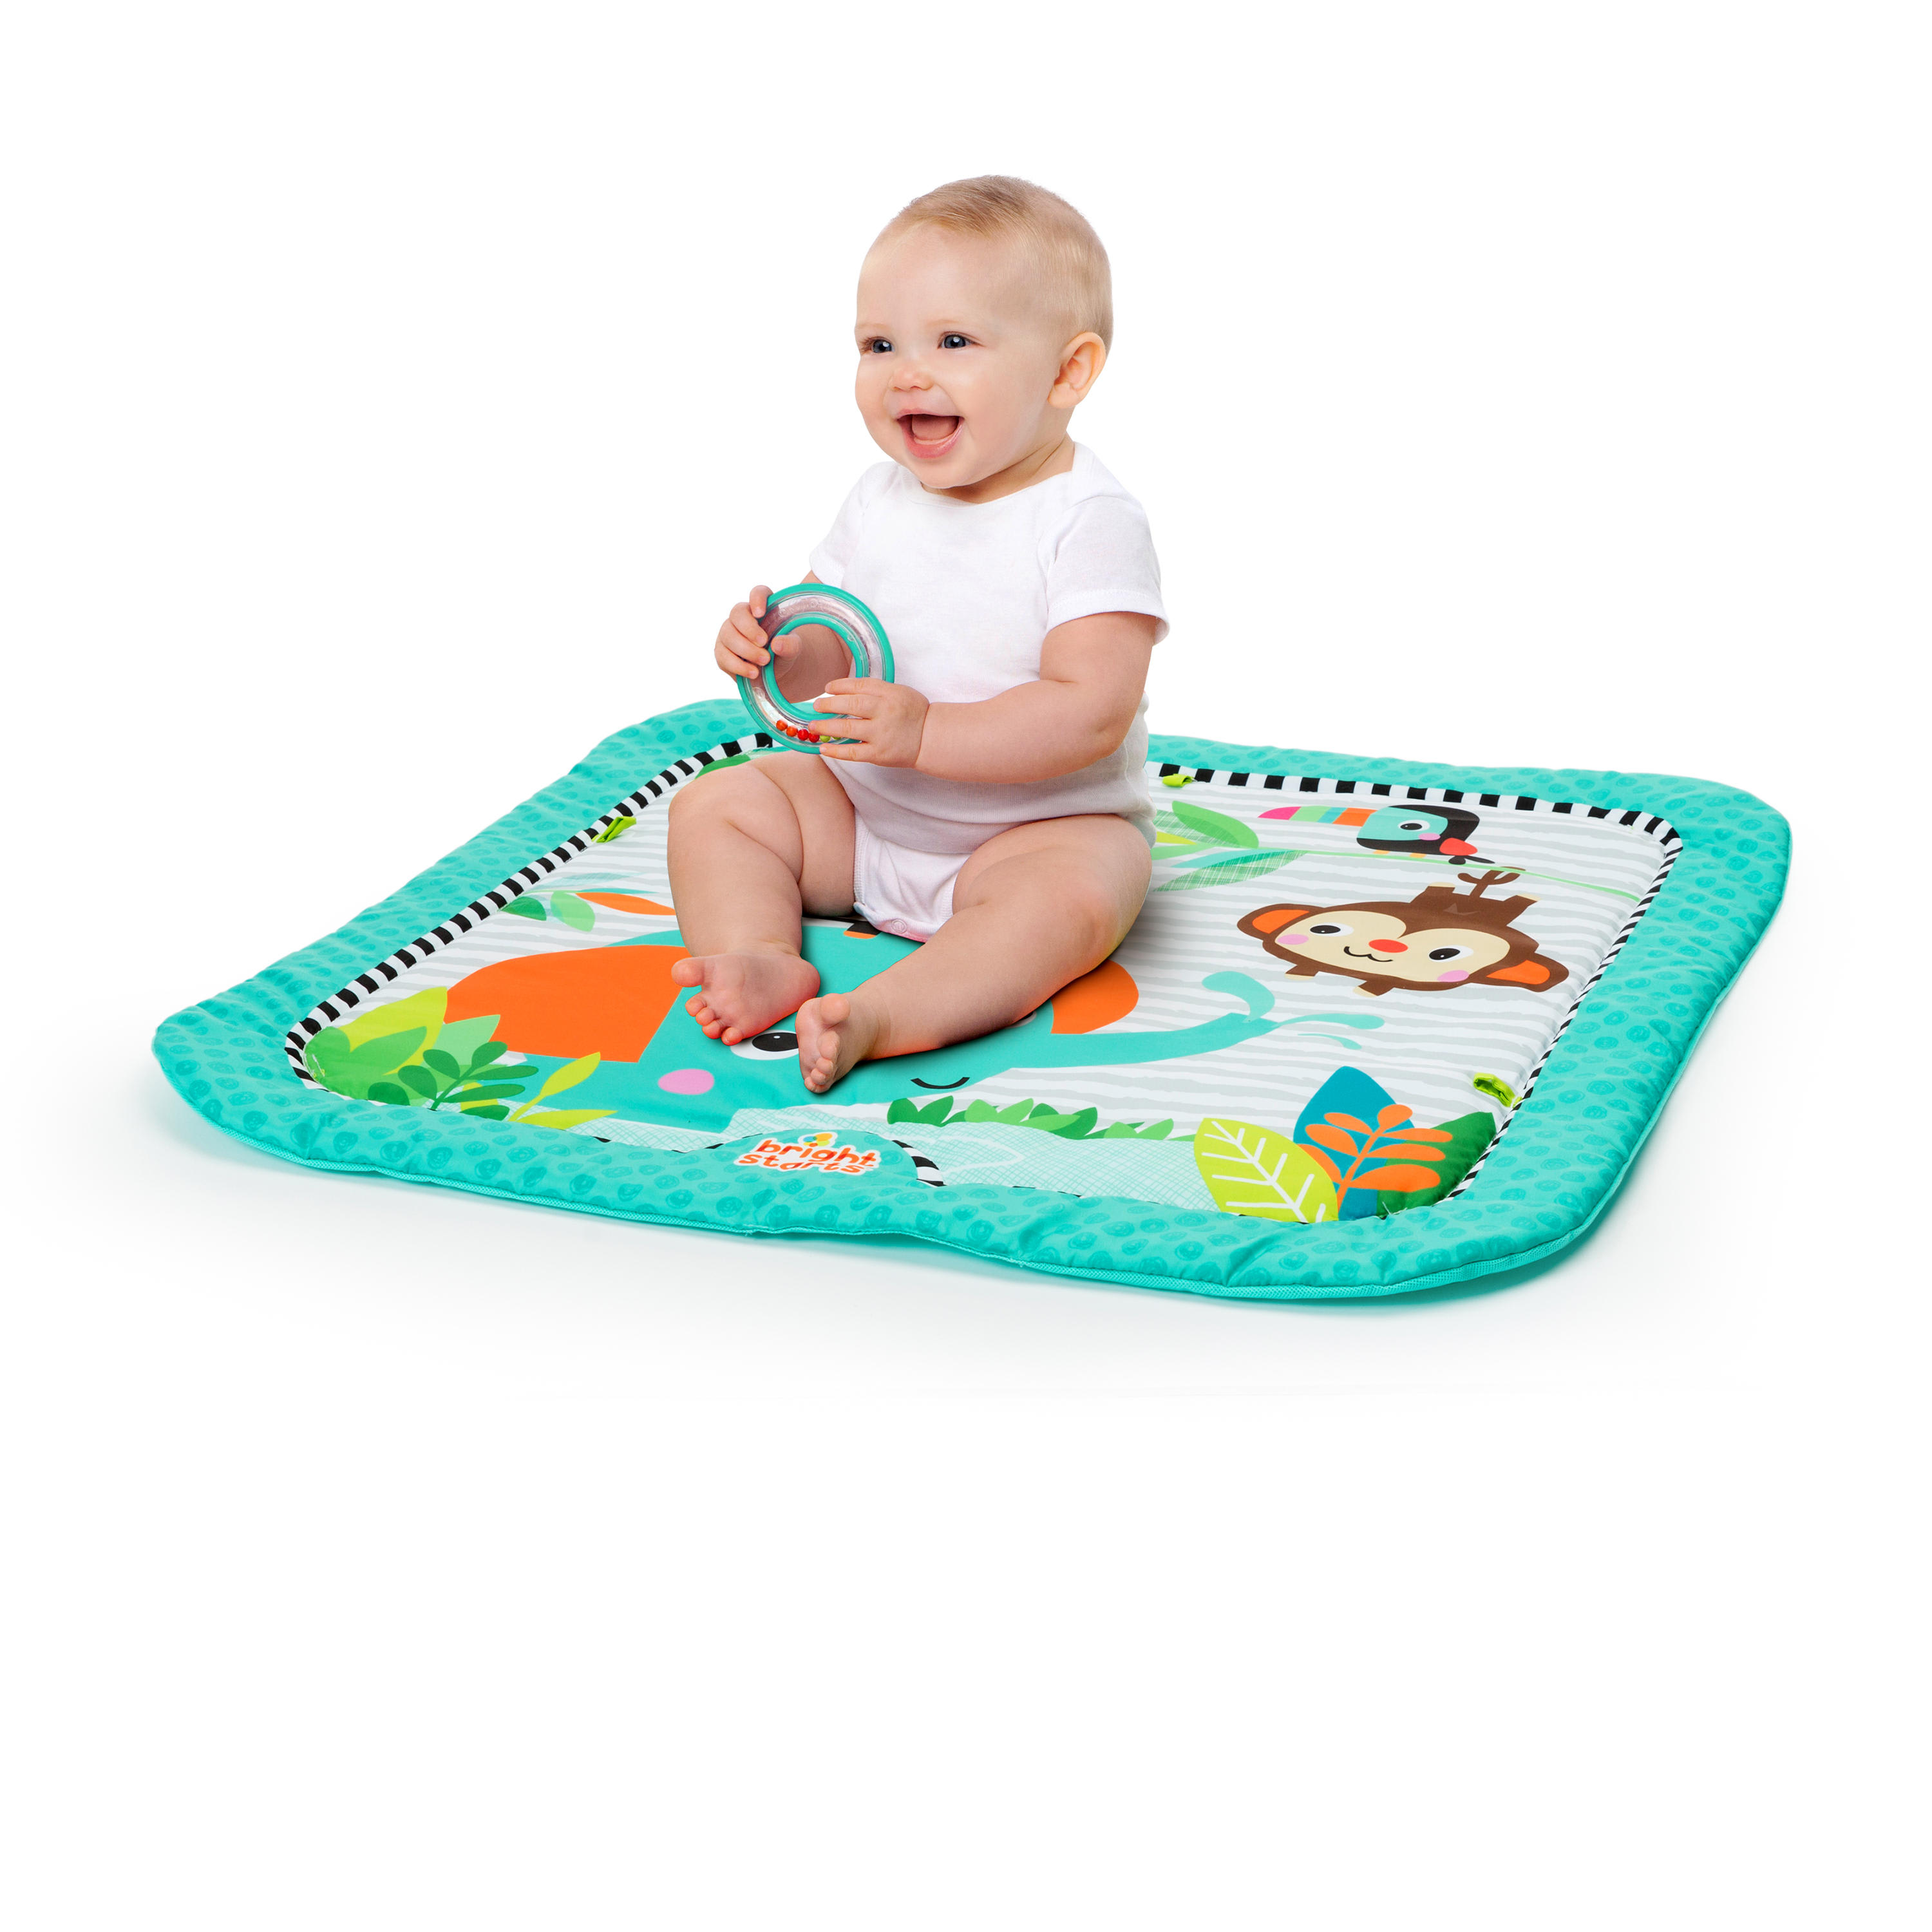 Bright Starts Zig Zag Safari Baby Activity Gym and Play Mat with Toys for Newborns and up - image 4 of 8